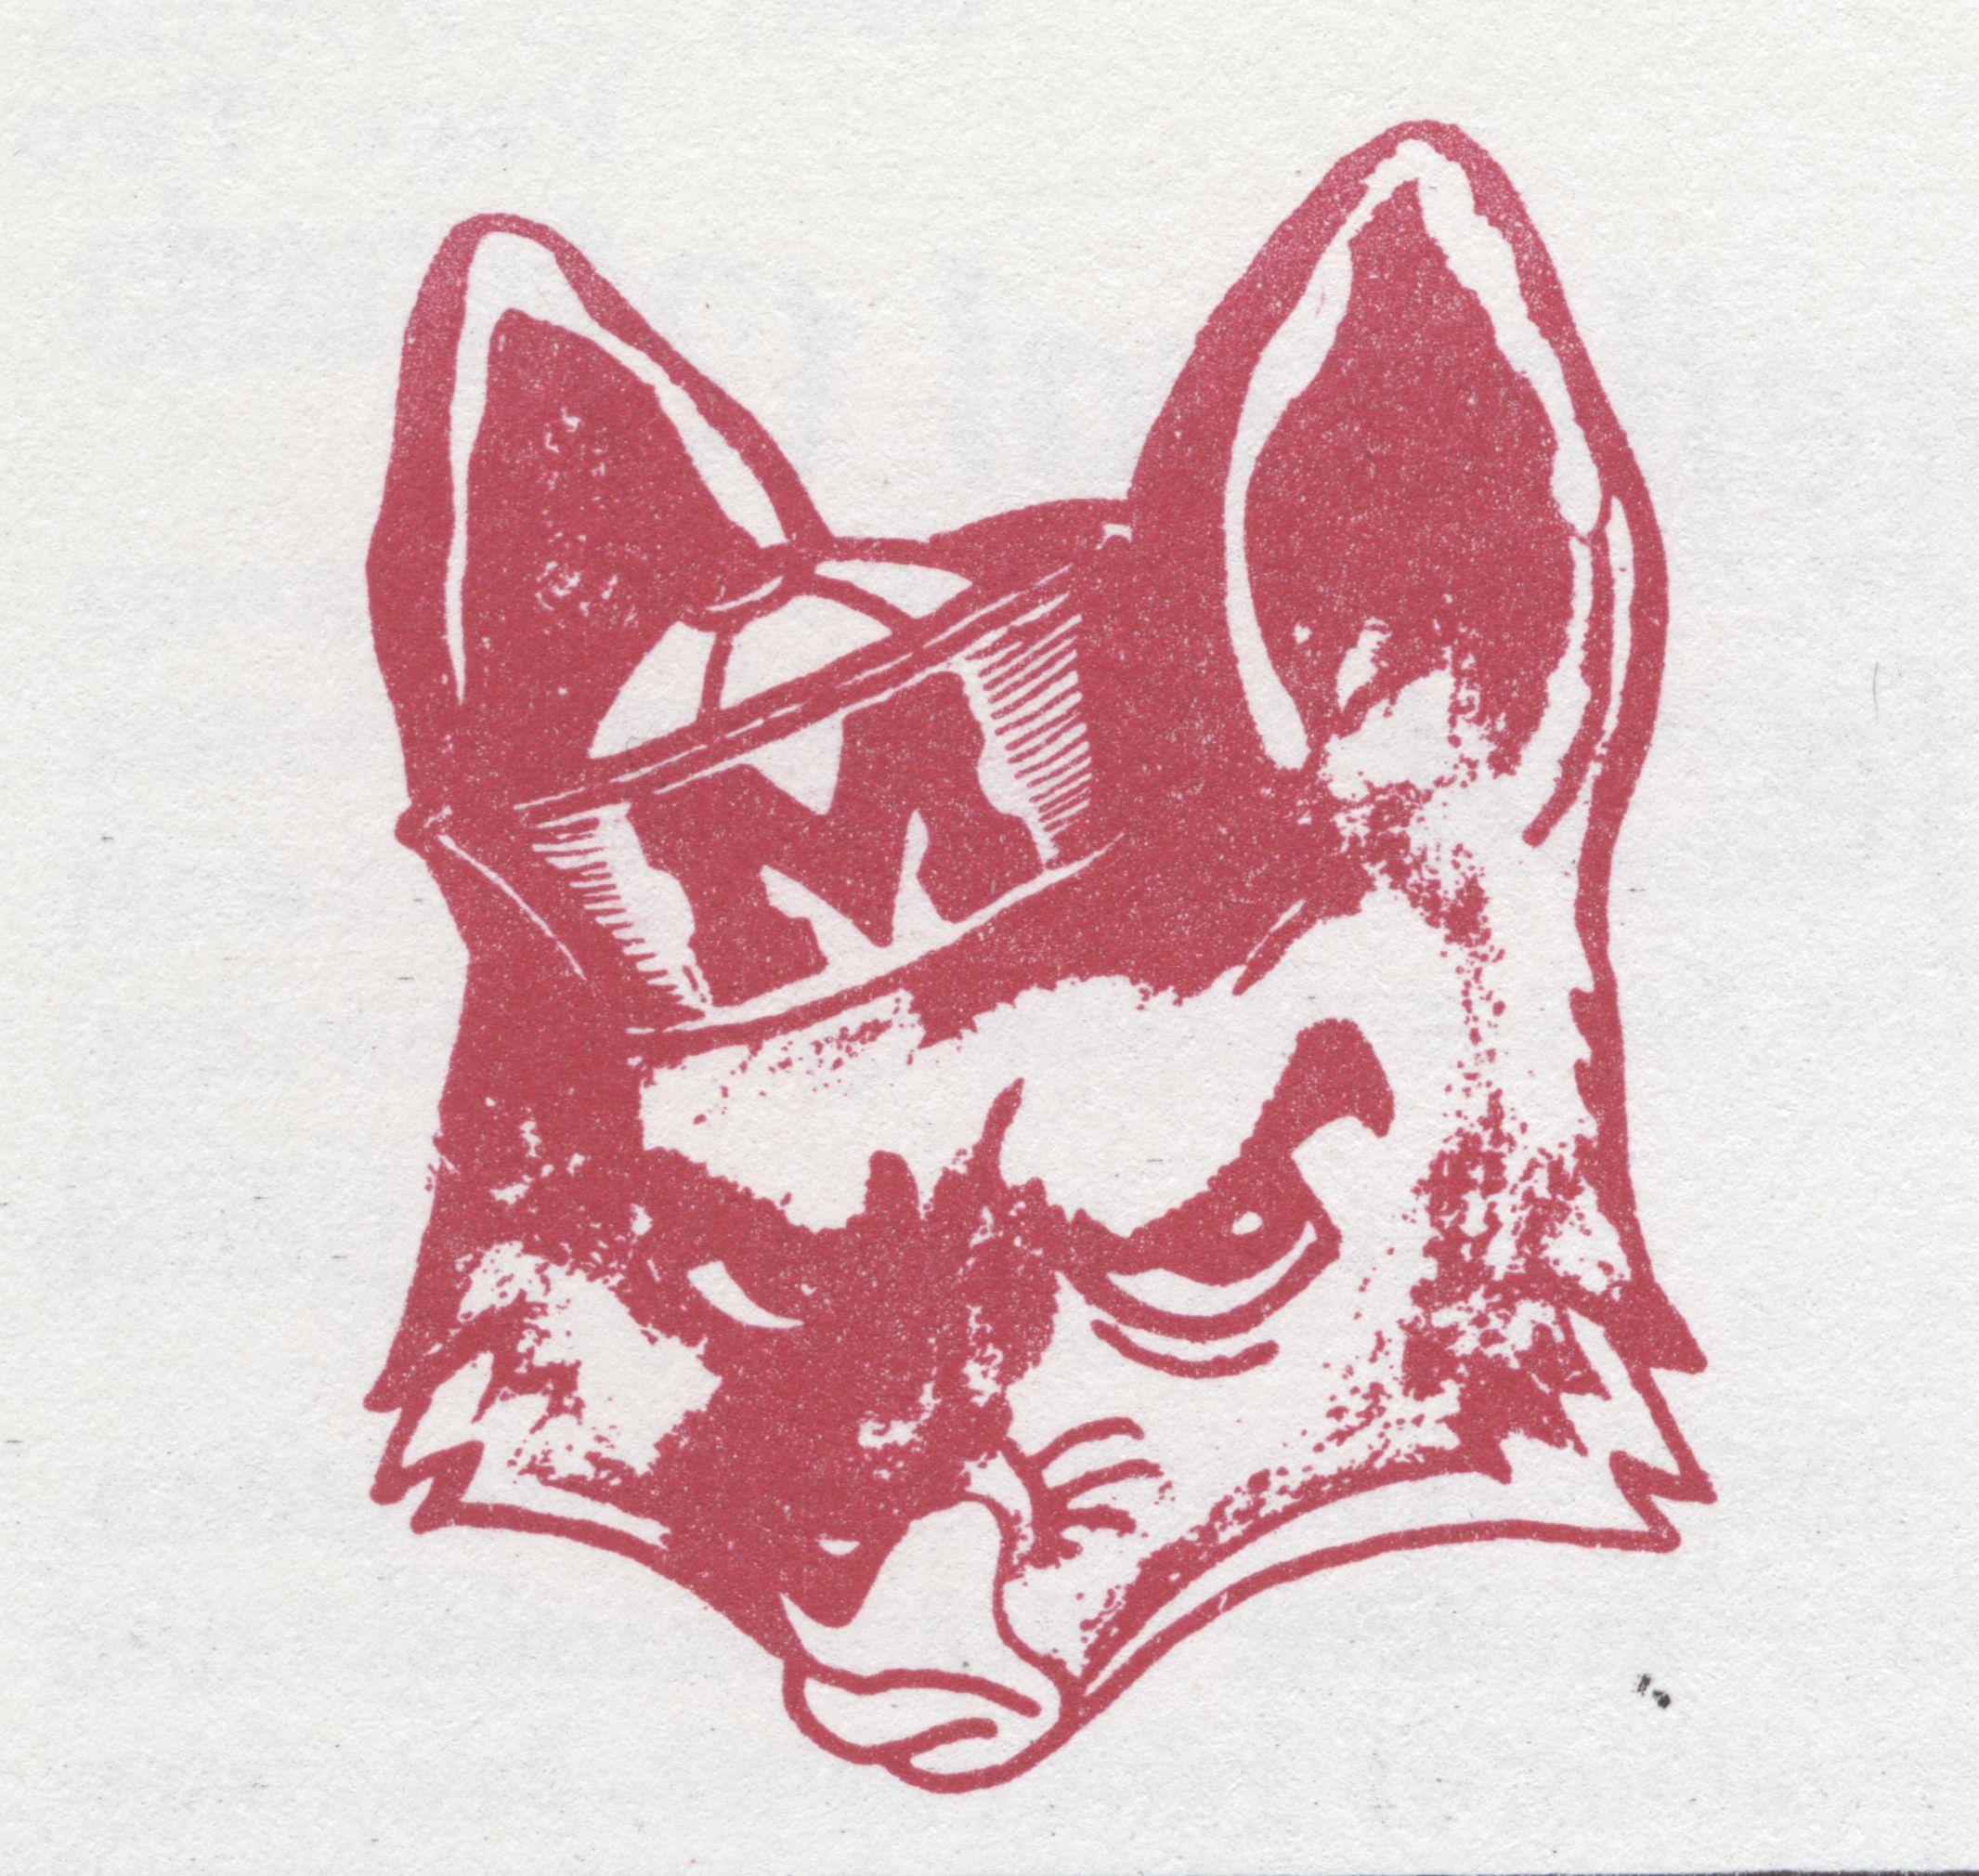 Marist Red Foxes Logo - Red Fox Logo 1964